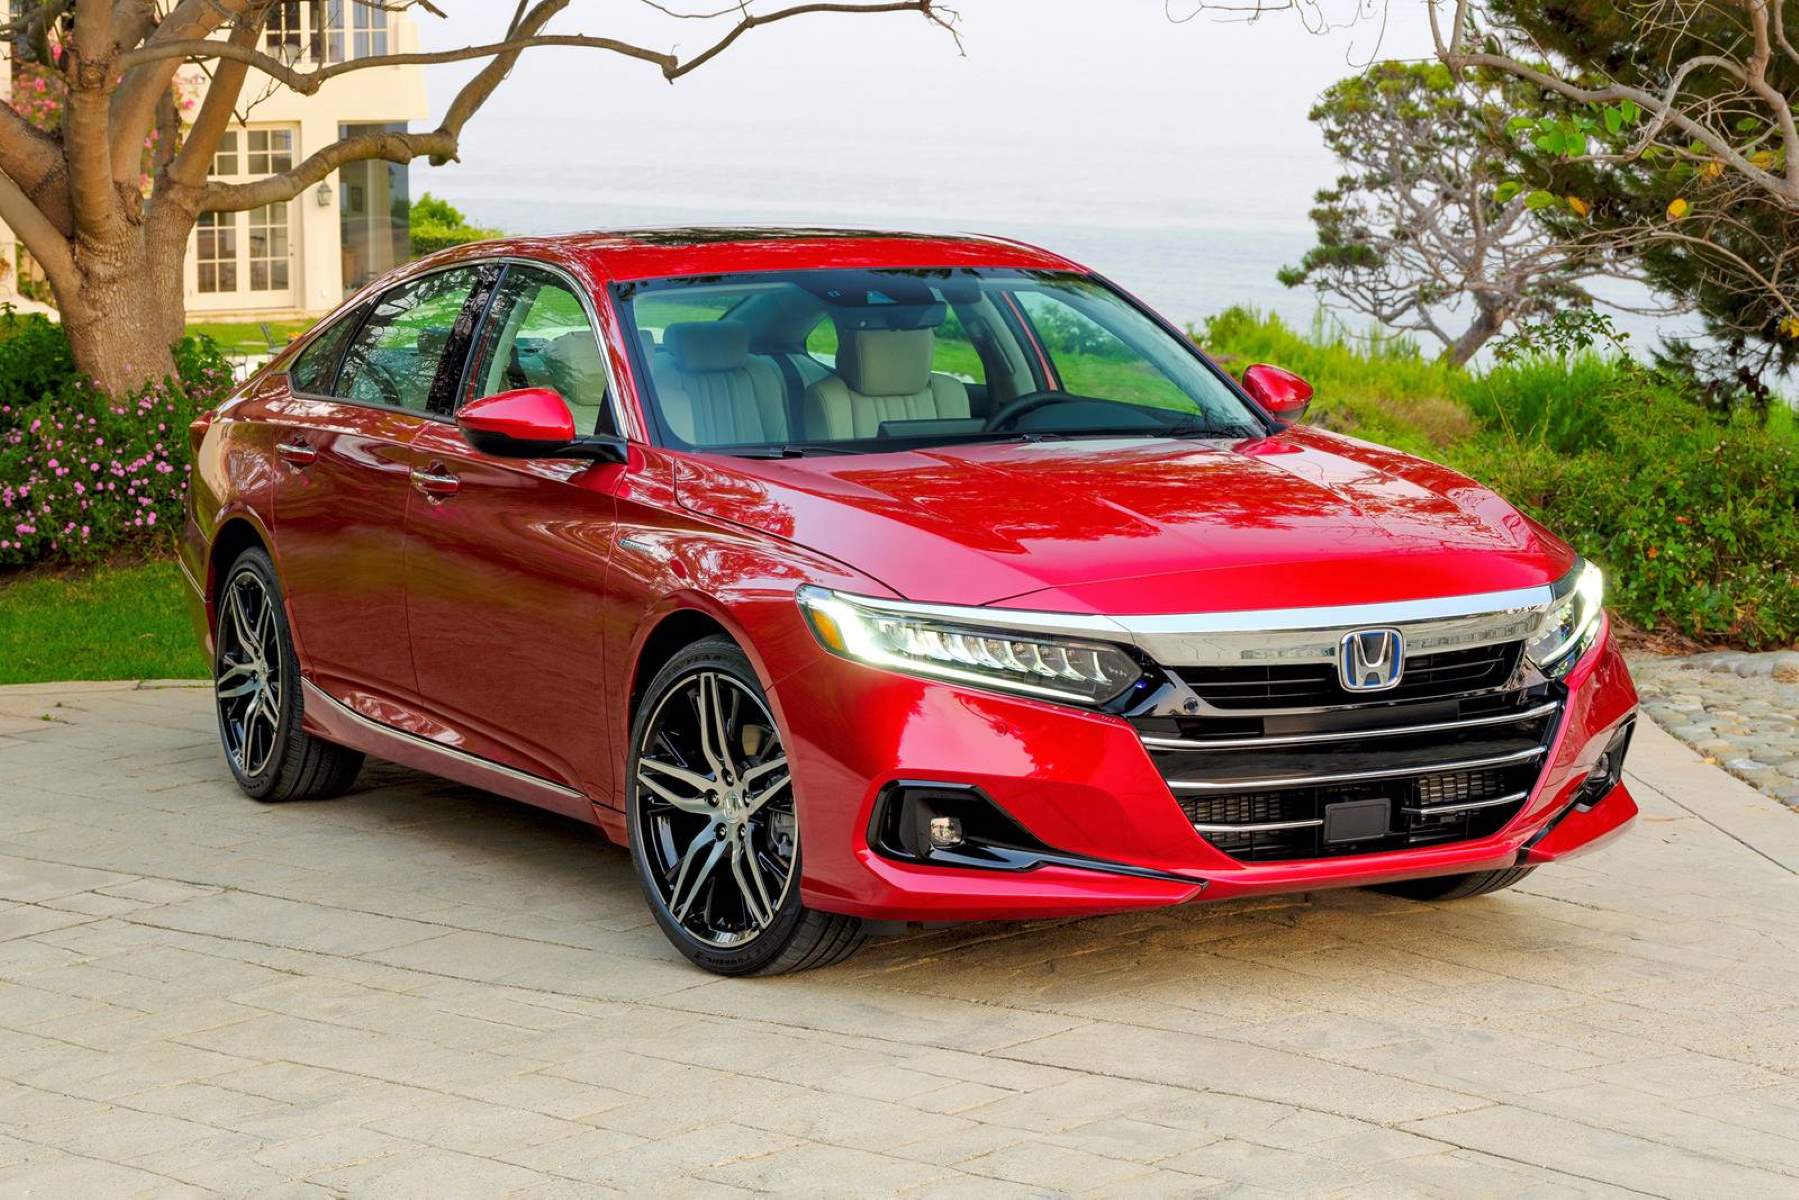 The Ultimate Guide To Finding The Perfect Used Honda Accord!